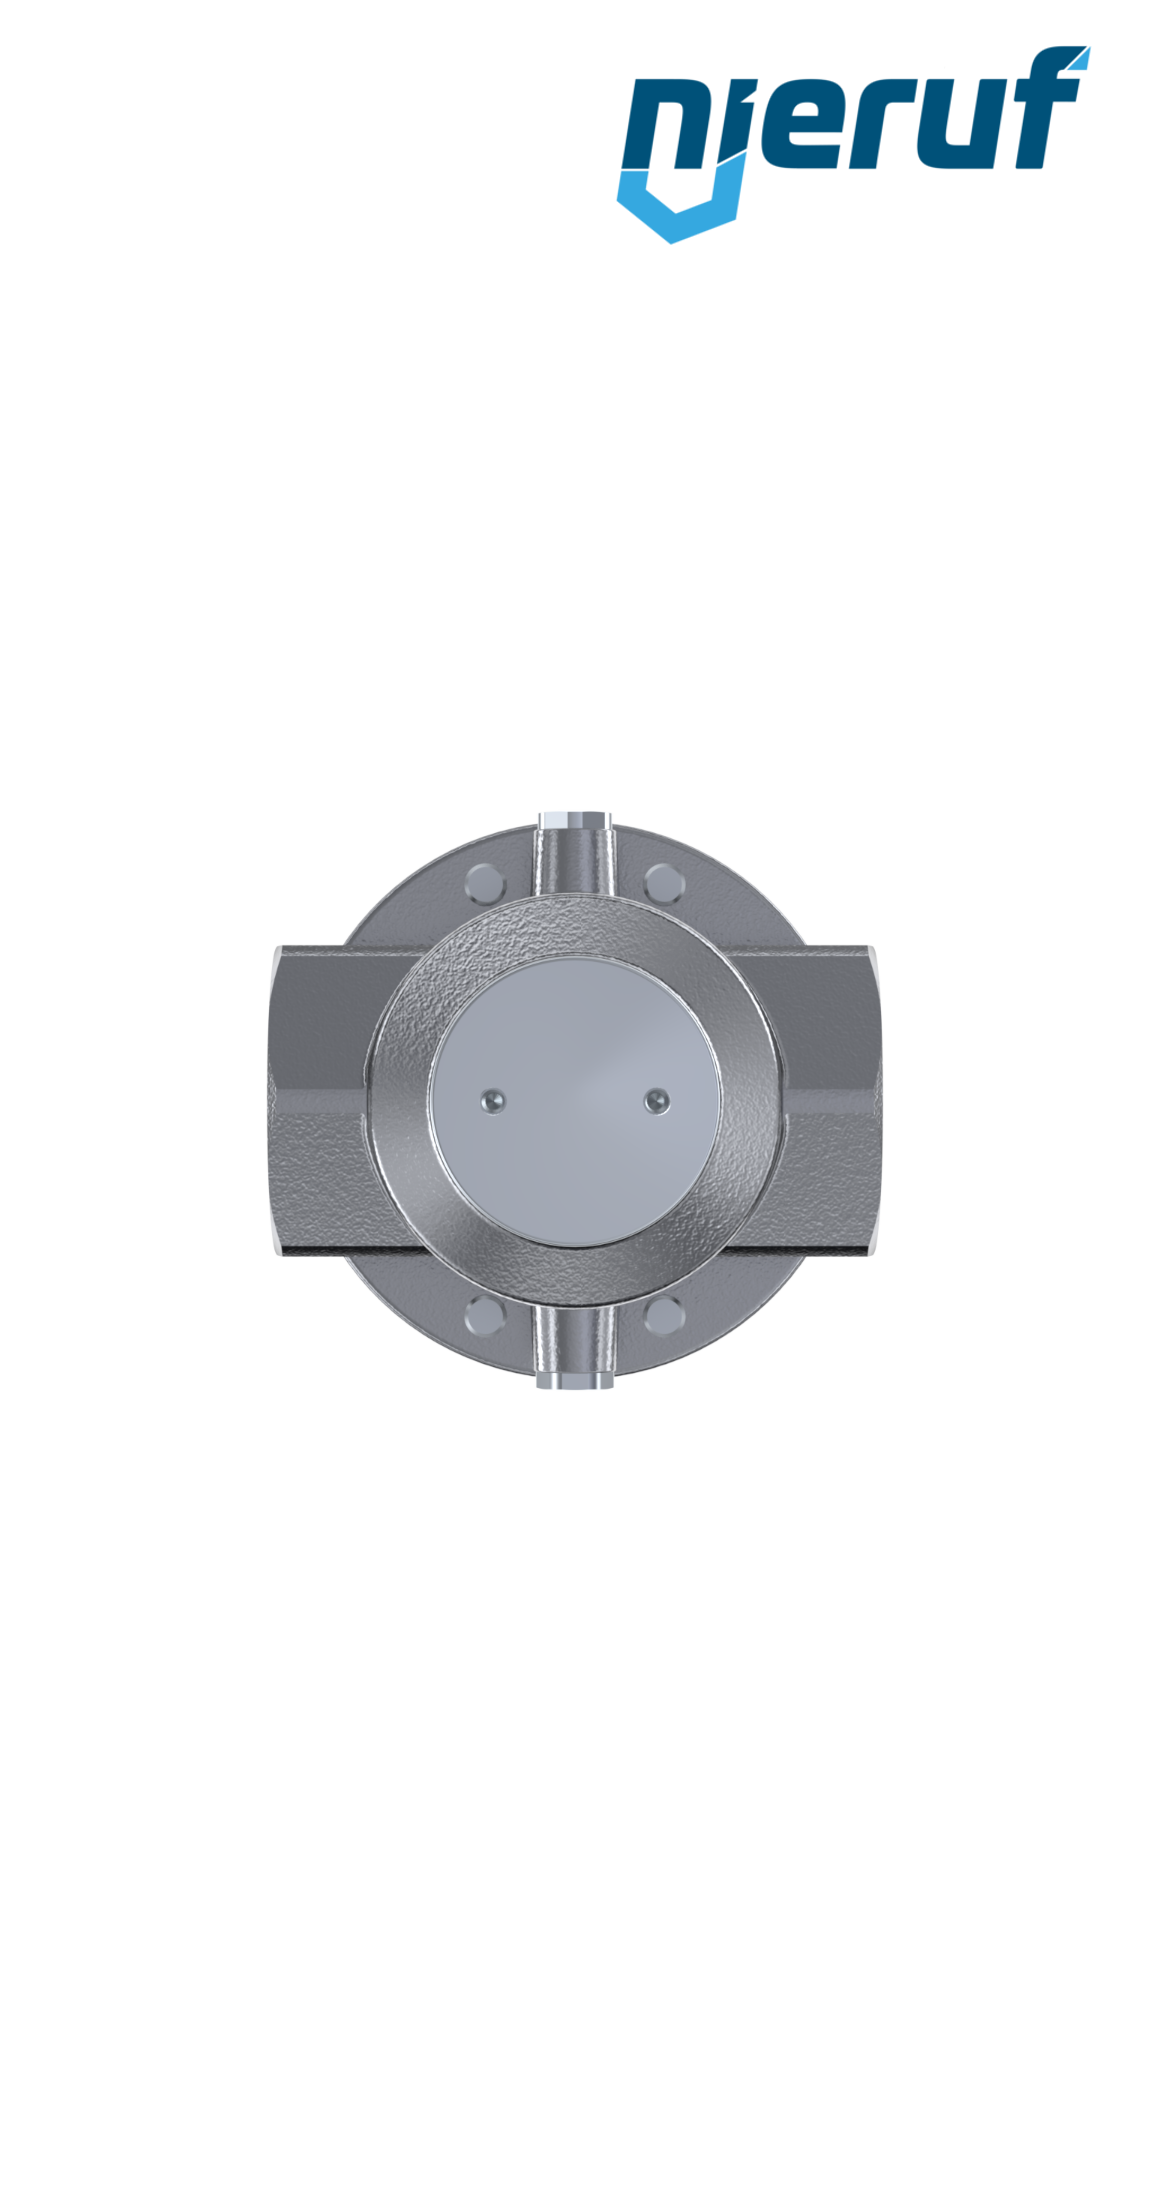 precision-pressure reducing valve with secondary venting 2" inch DM15 stainless steel FKM 0.5 - 15 bar